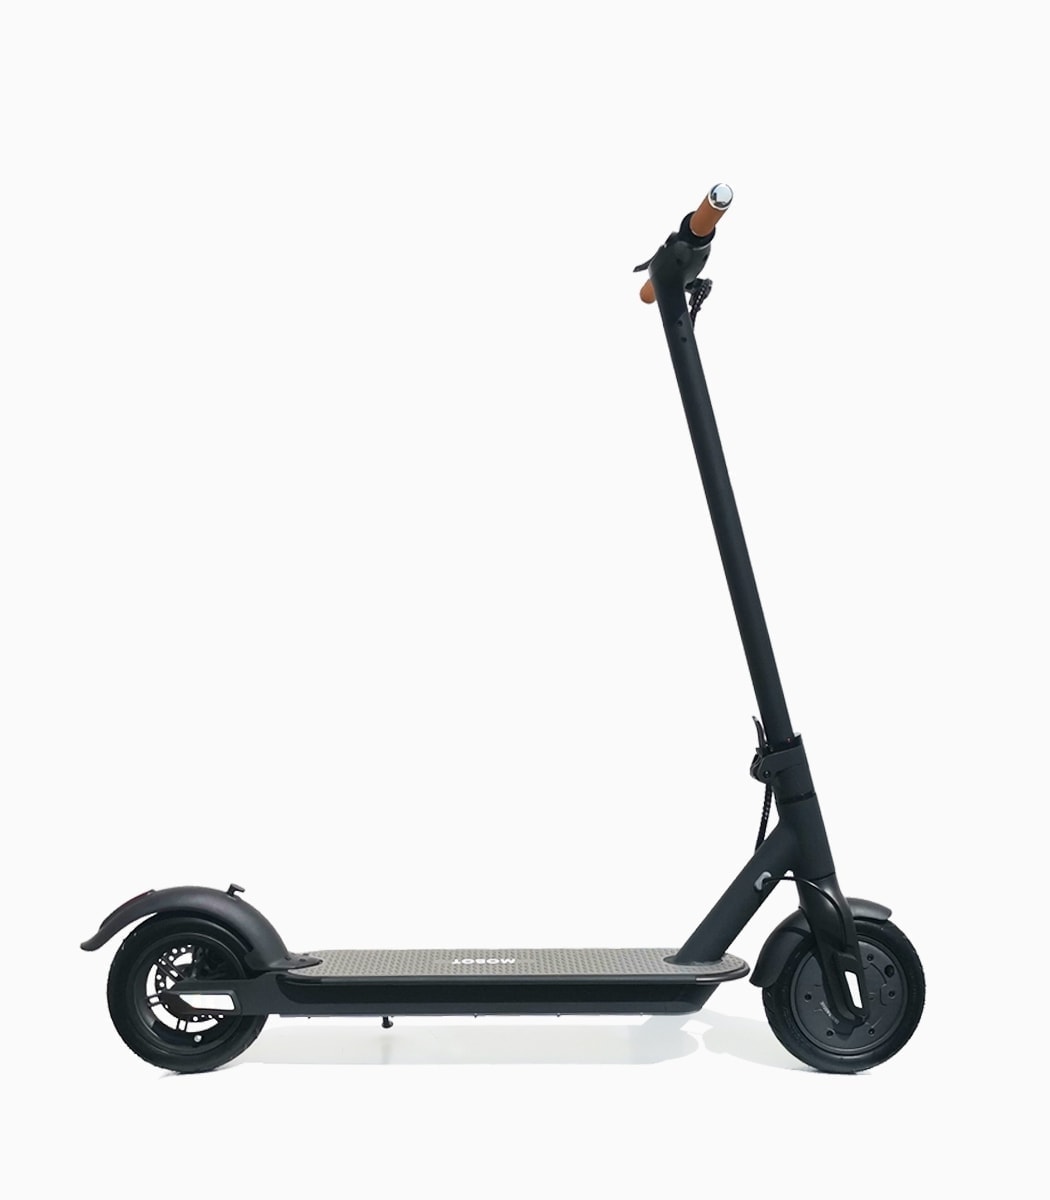 MOBOT L1-1 (BLACK7.5AH) UL2272 certified e-scooter right